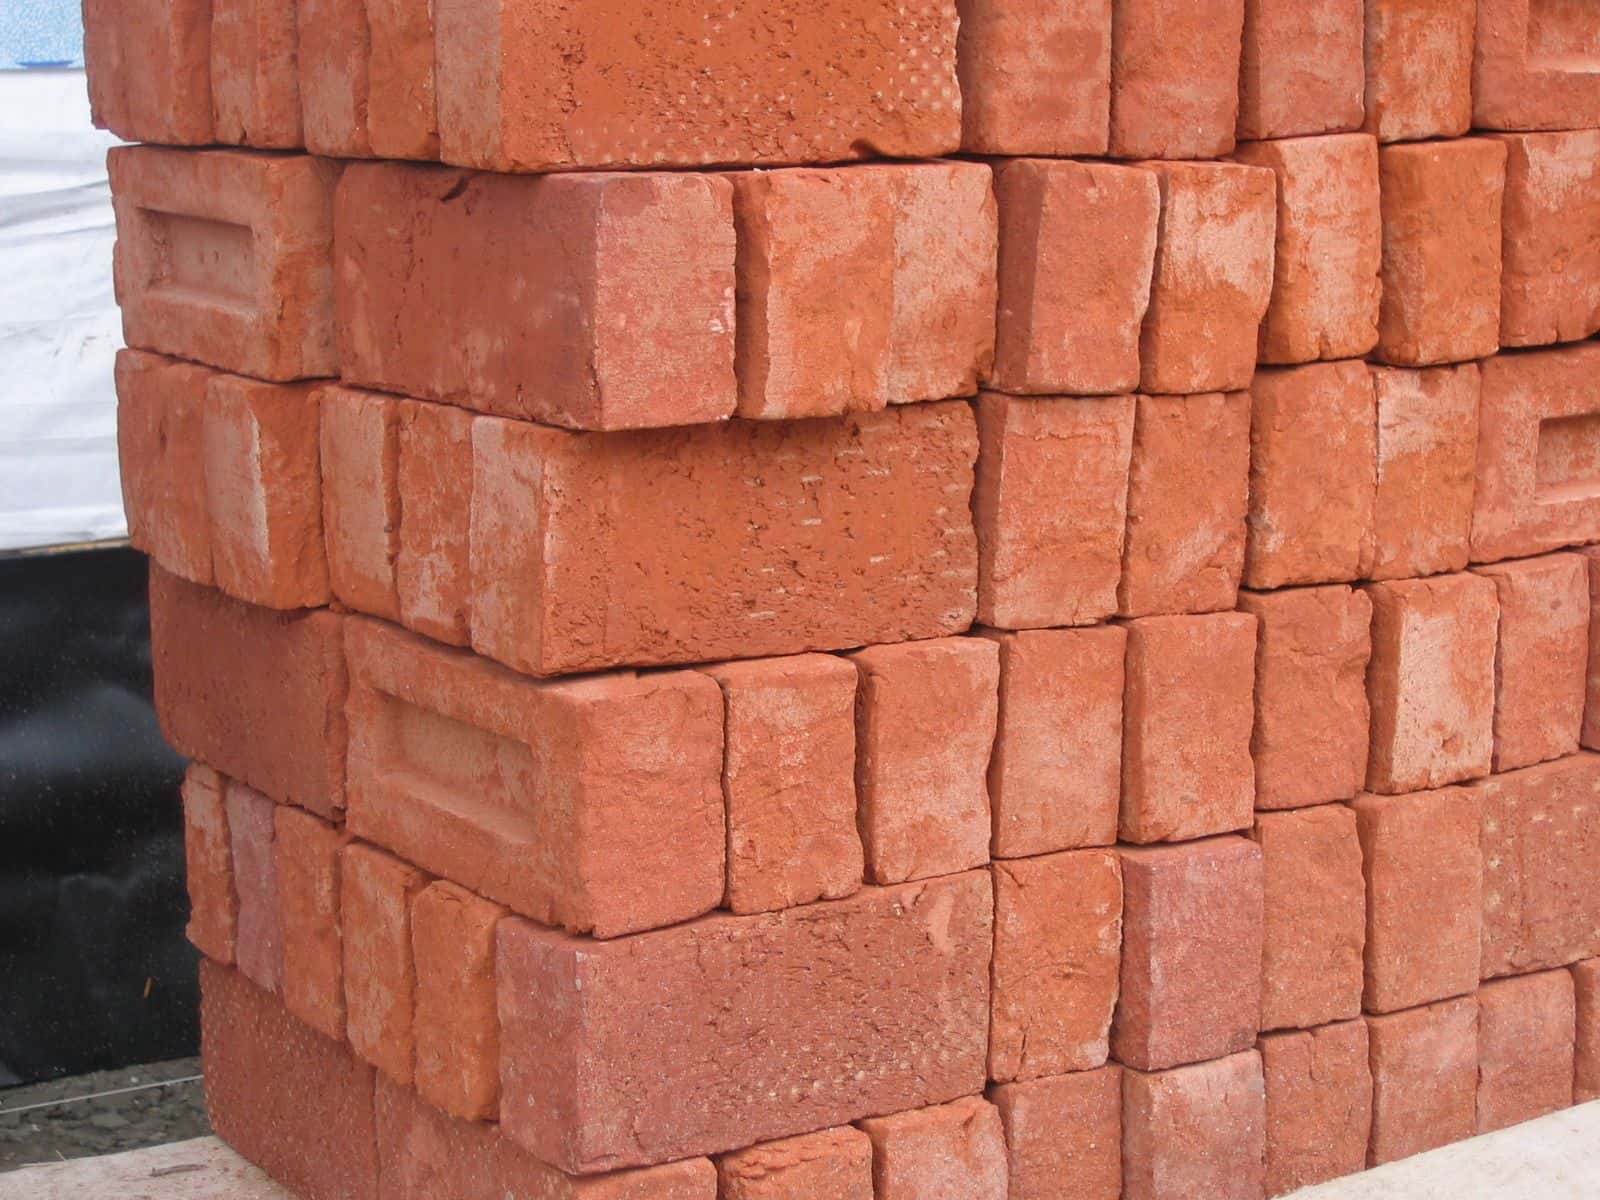 Field test for good quality of burnt clay bricks. ~ PARAM VISIONS